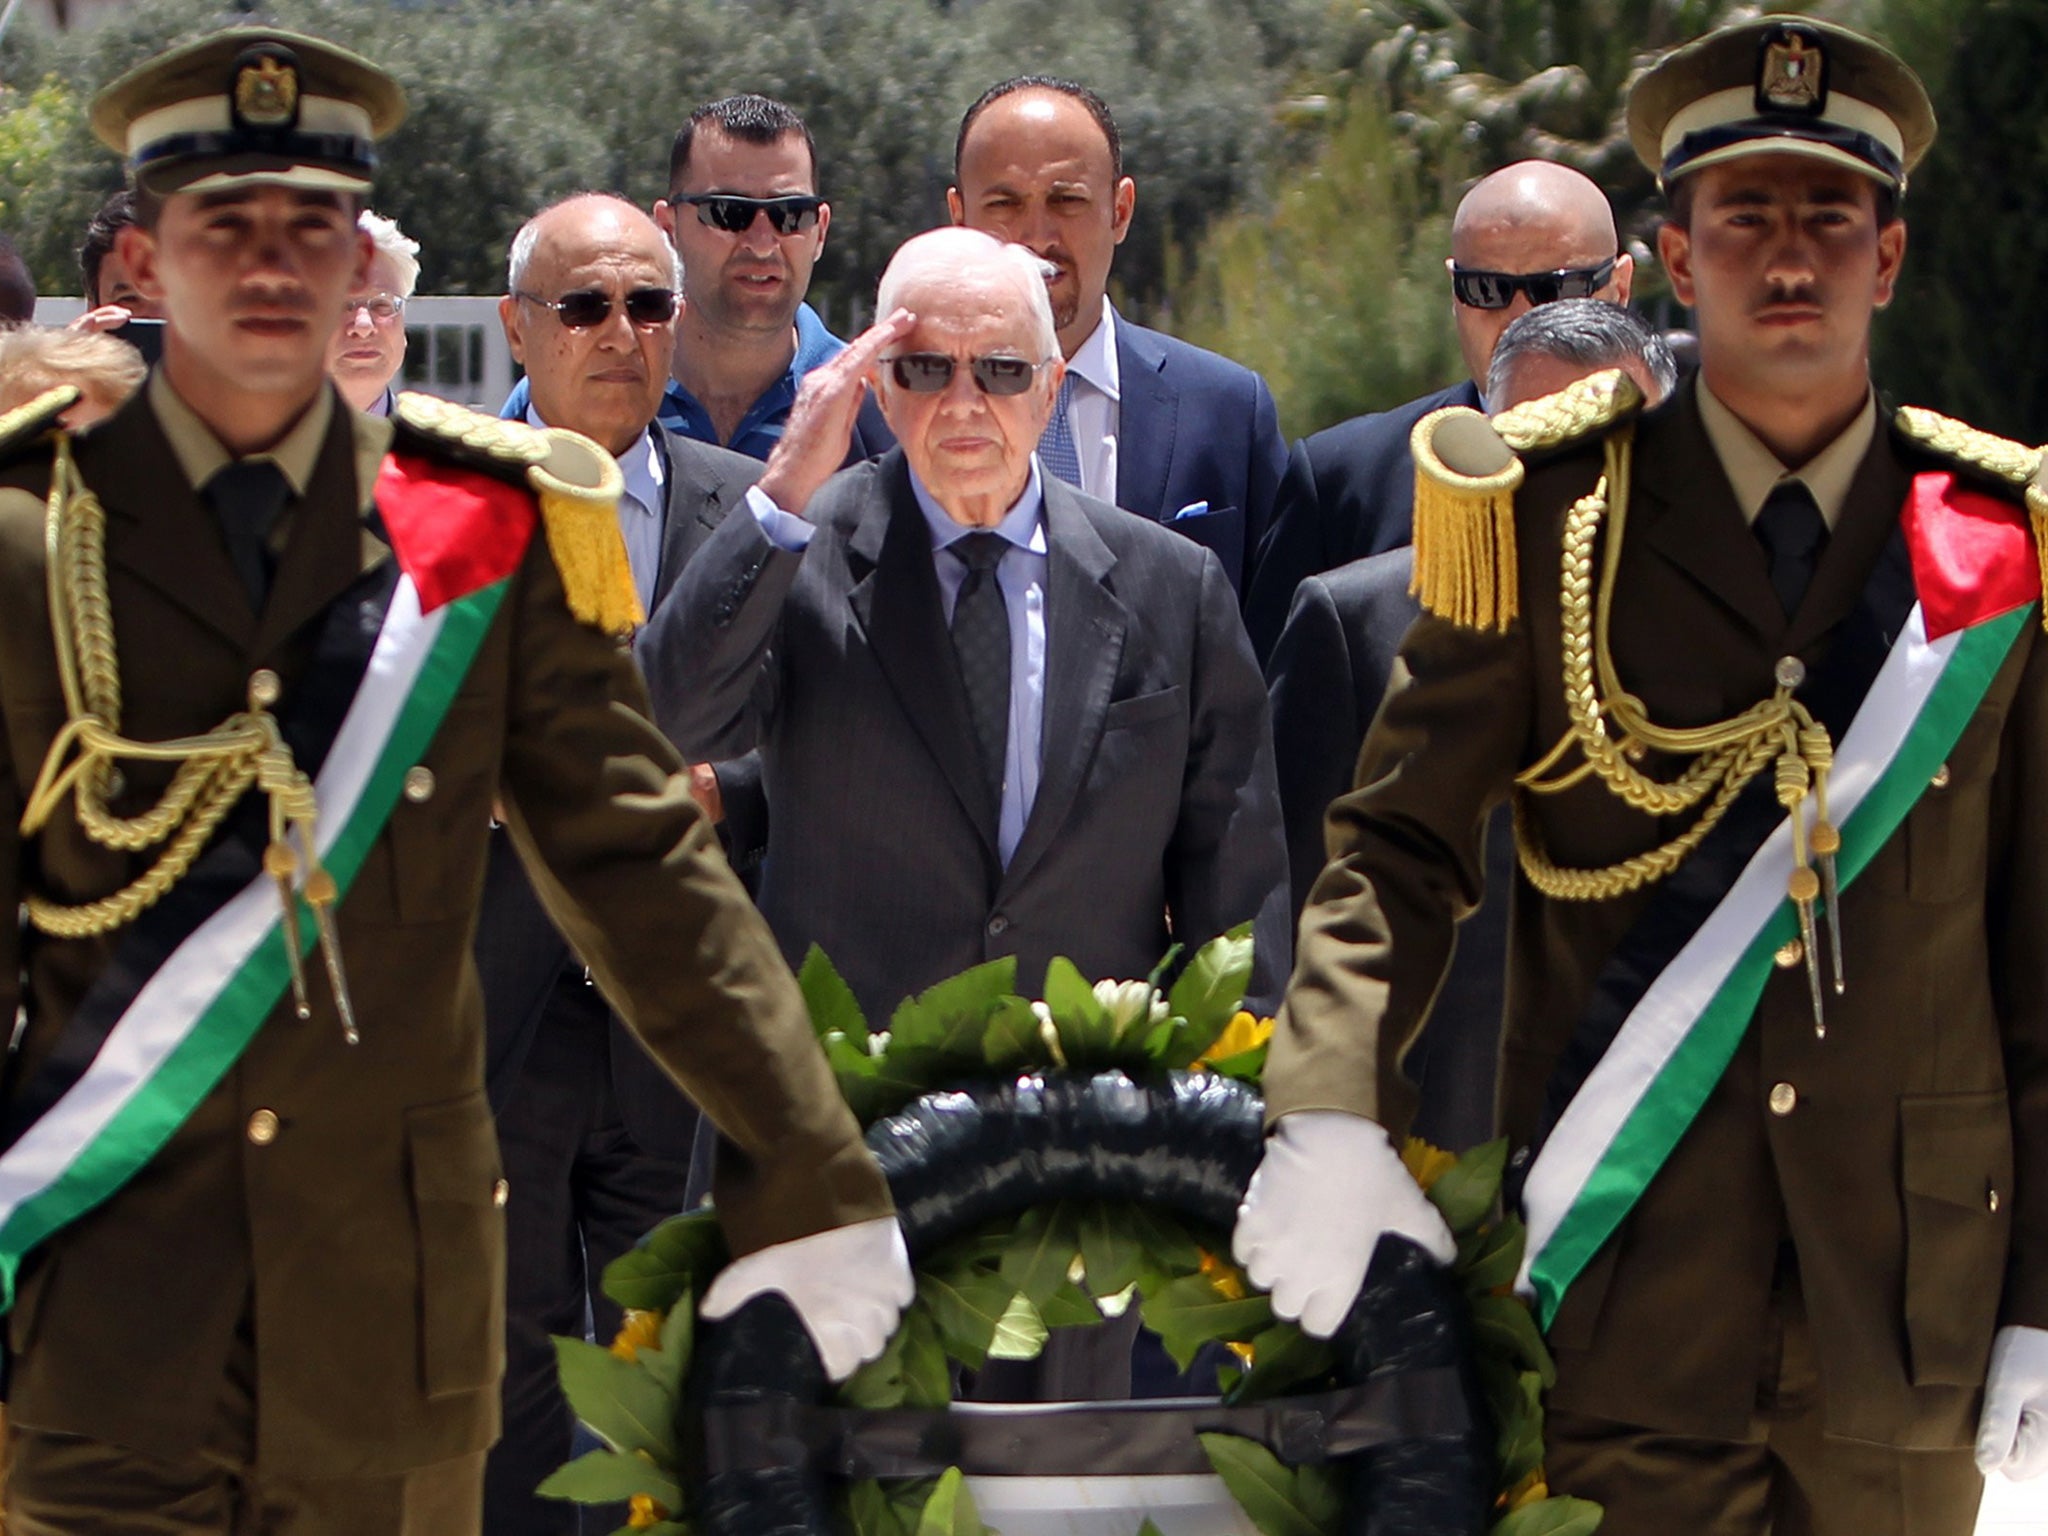 Jimmy Carter (centre) prepares to lay a wreath of flowers on the tomb of the late Palestinian leader Yasser Arafat